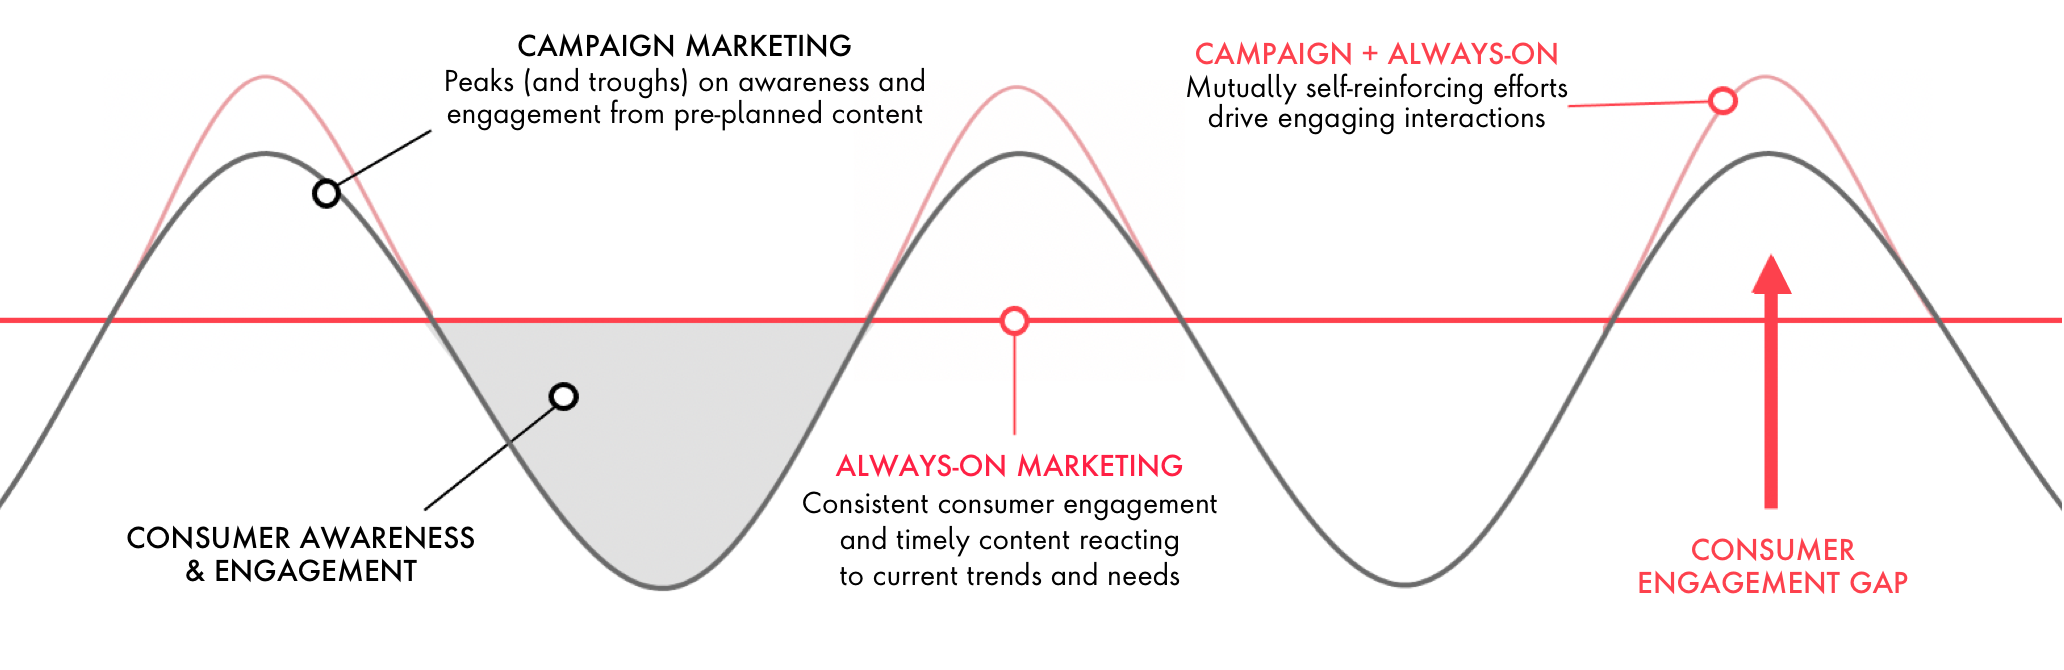 Chart showing the peaks and valleys of a campaign-only approach vs. the consistent engagement generated by an always-on approach.